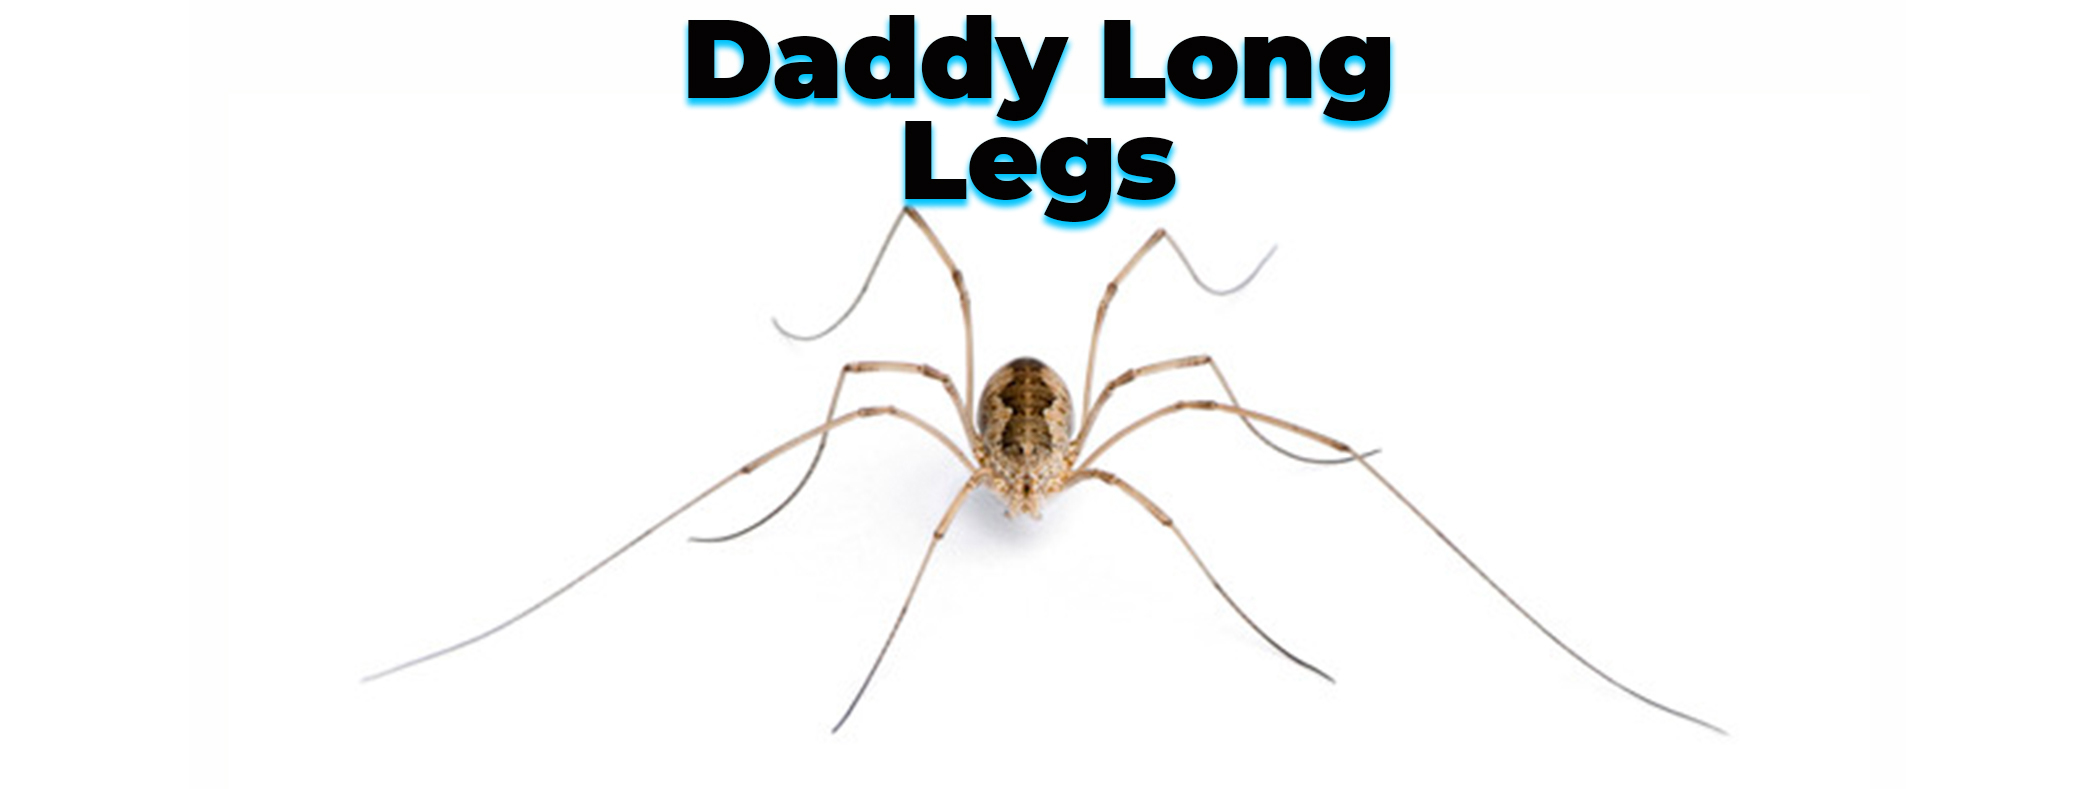 Daddy long legs.png